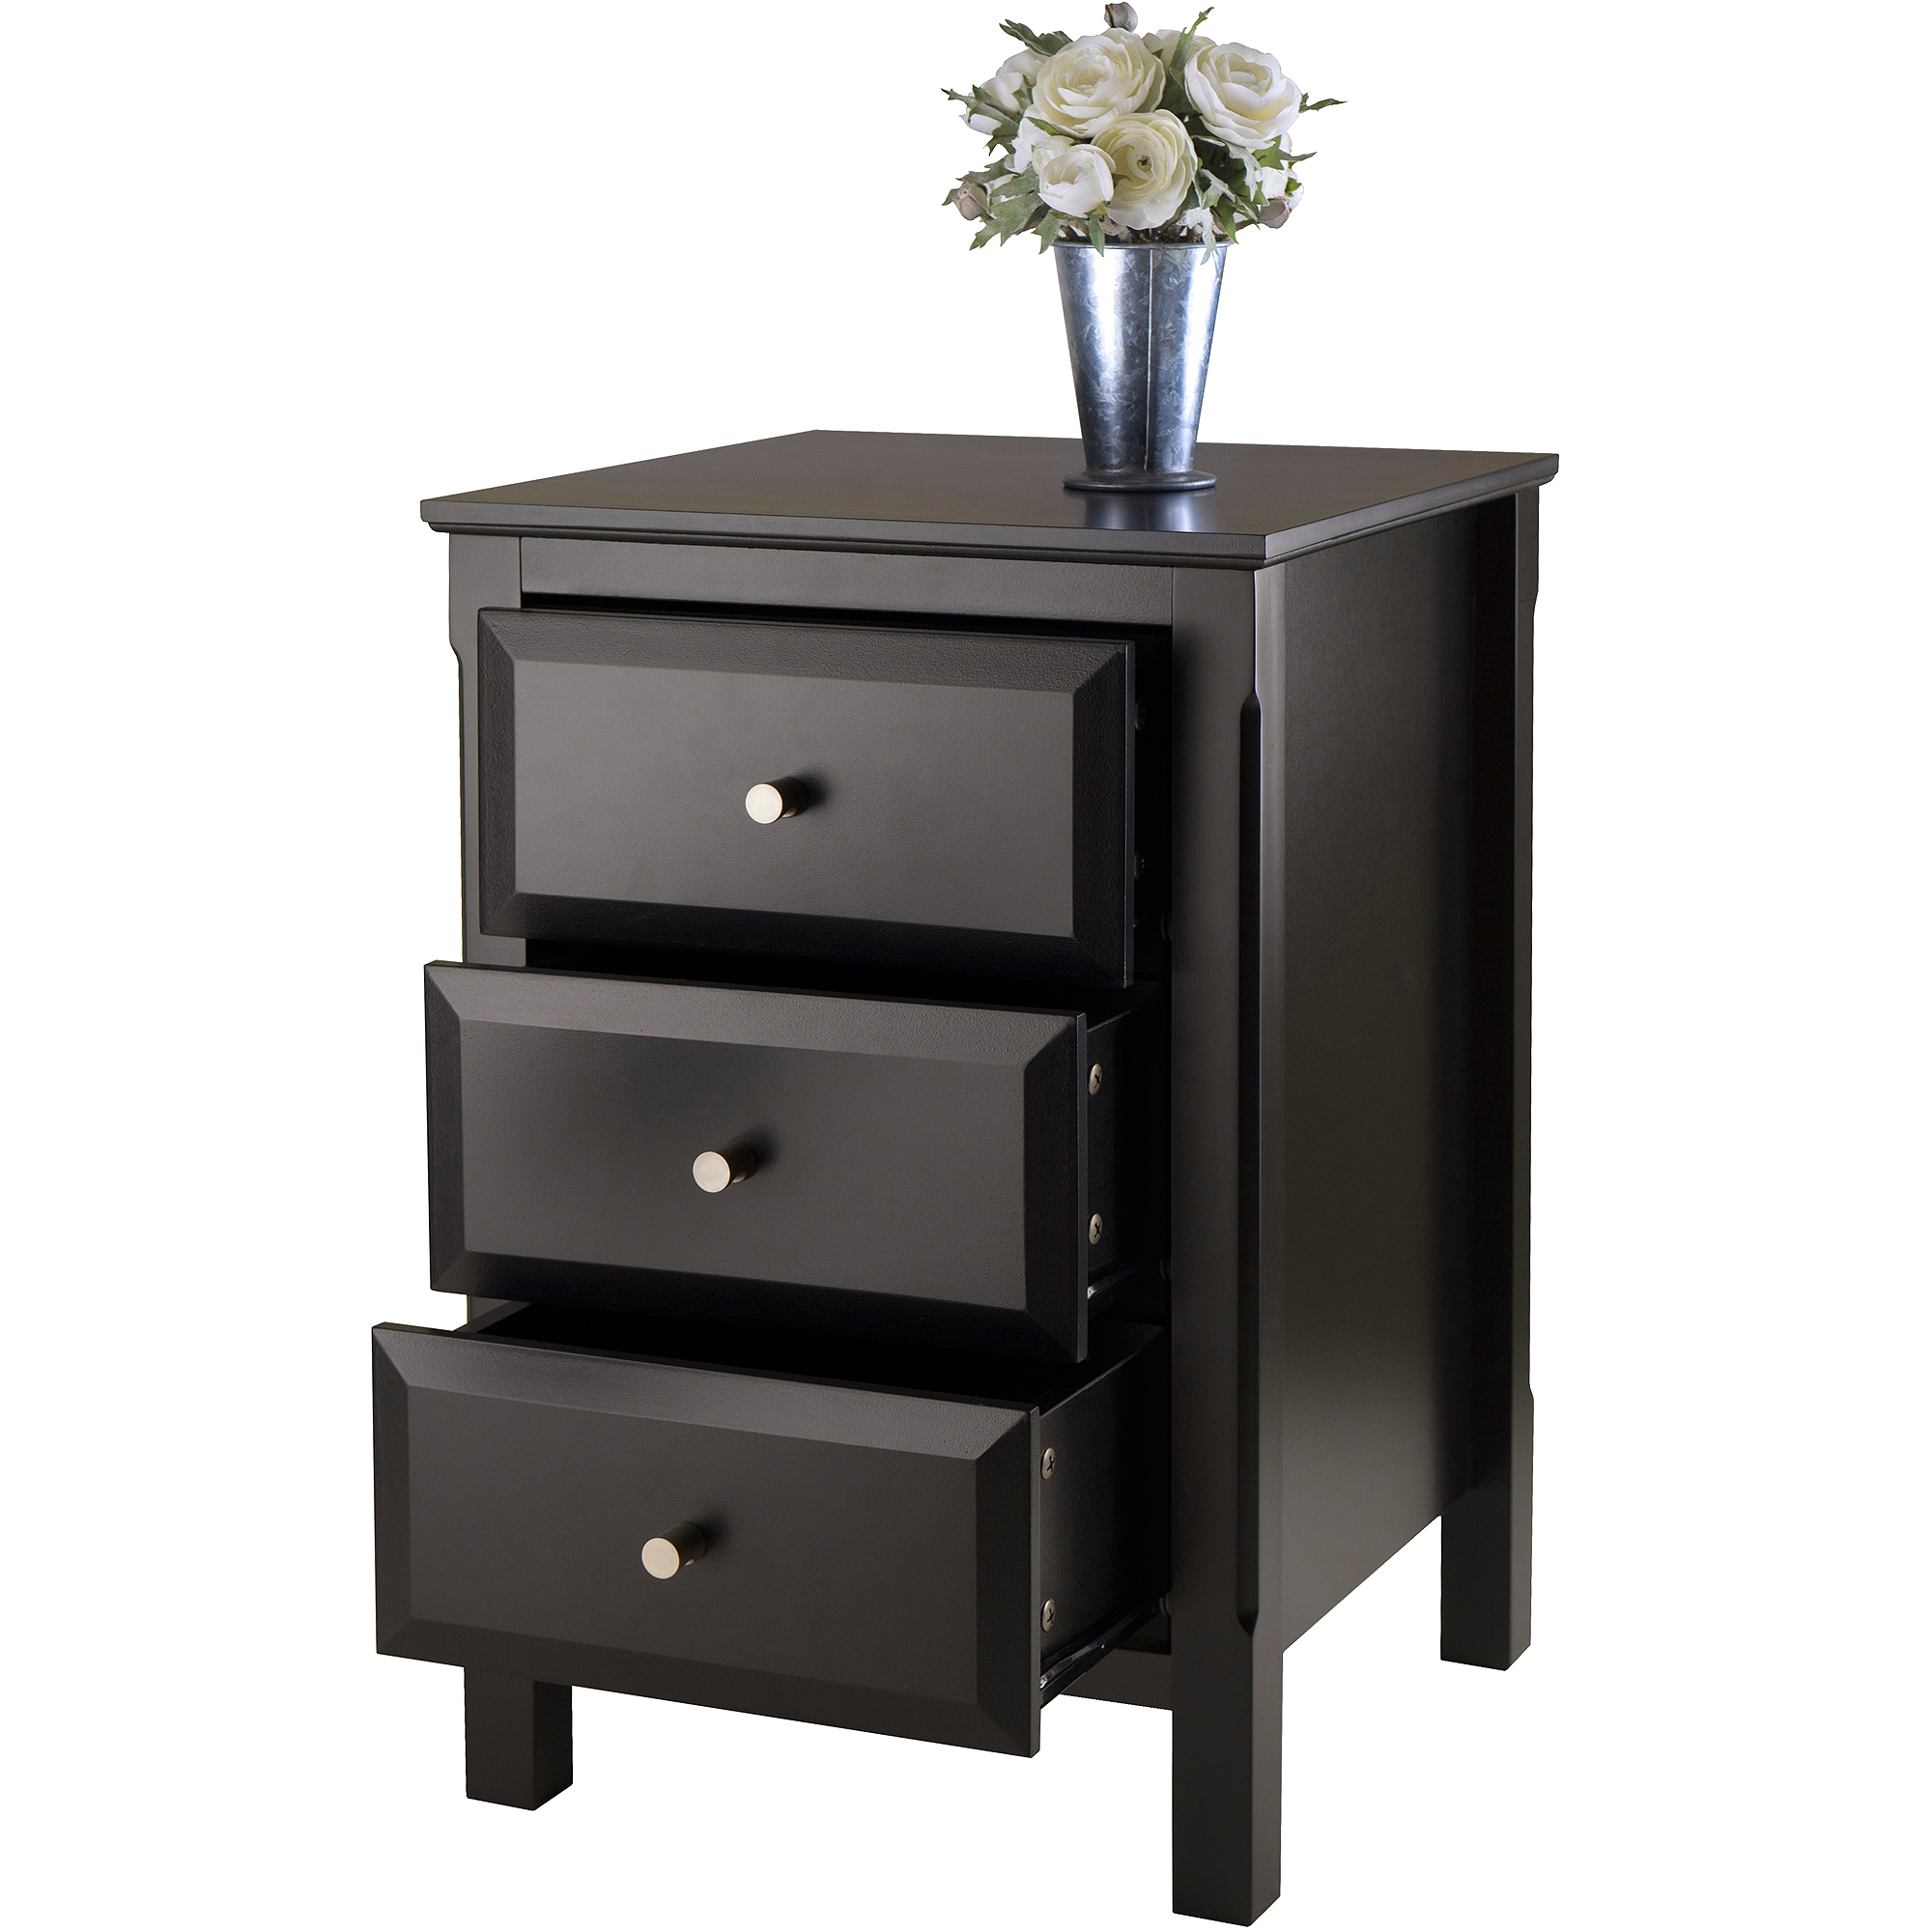 winsome timmy nightstand accent table black tall white battery powered bedside light oak legs pier one dining bench barn carpet metal strip gold with glass top hall chests and